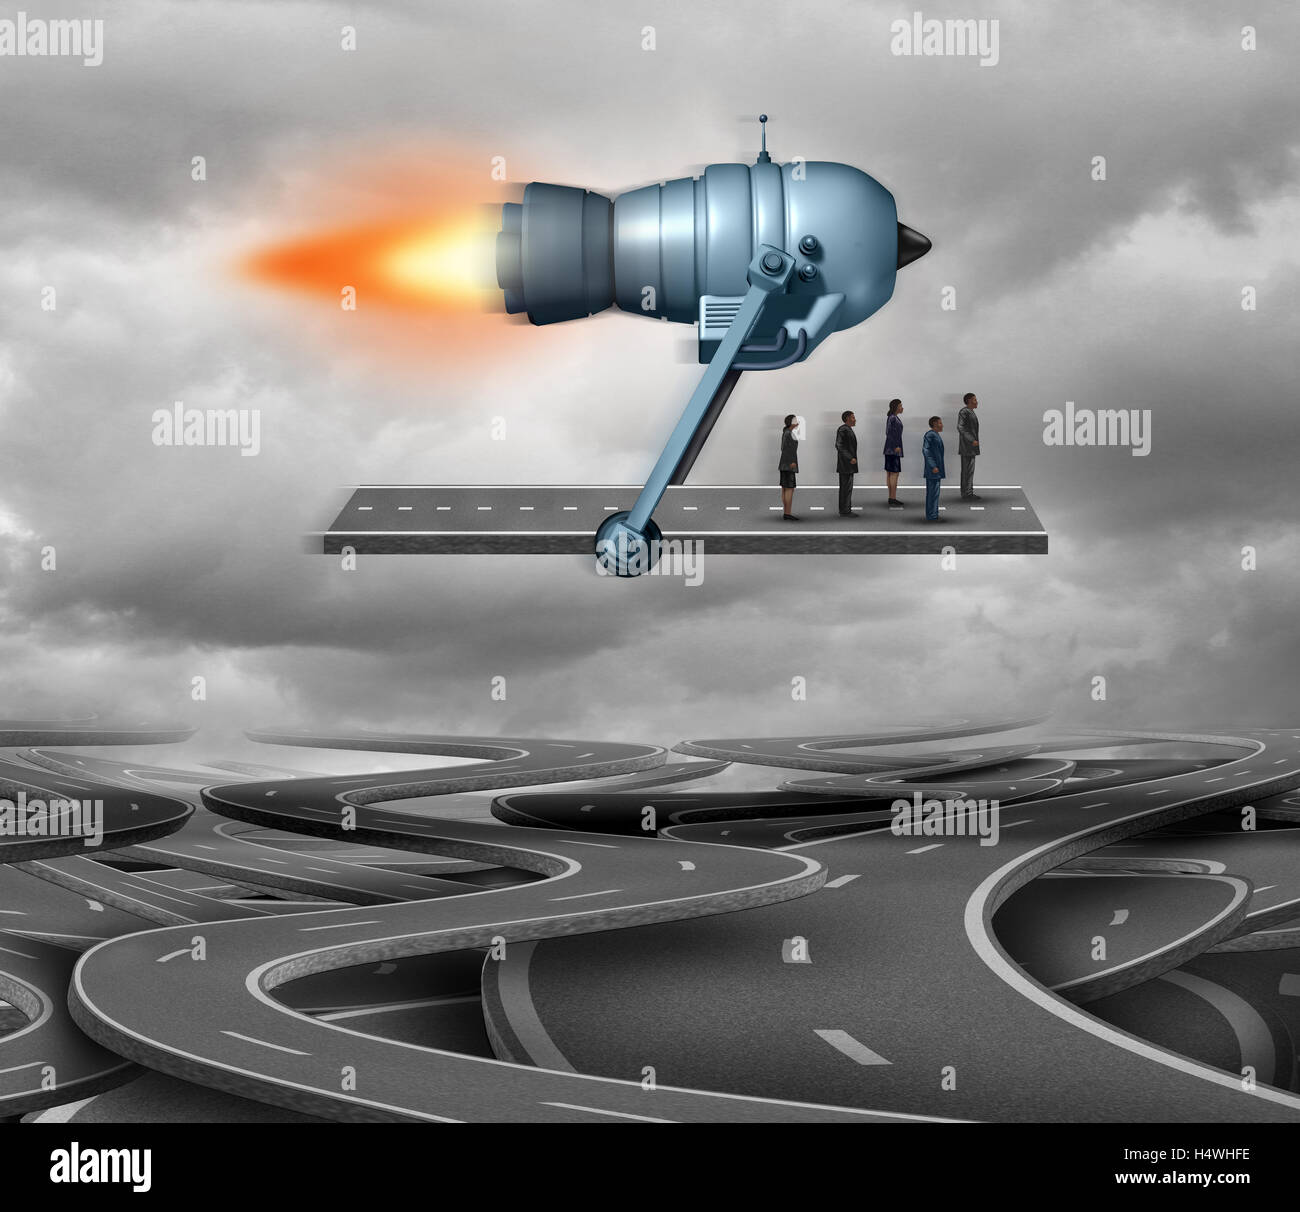 Fast track and direct route concept or business travel symbol as piece of road being thrusted by a rocket engine transporting businesspeople as a corporate achievement symbol with 3D illustration elements. Stock Photo